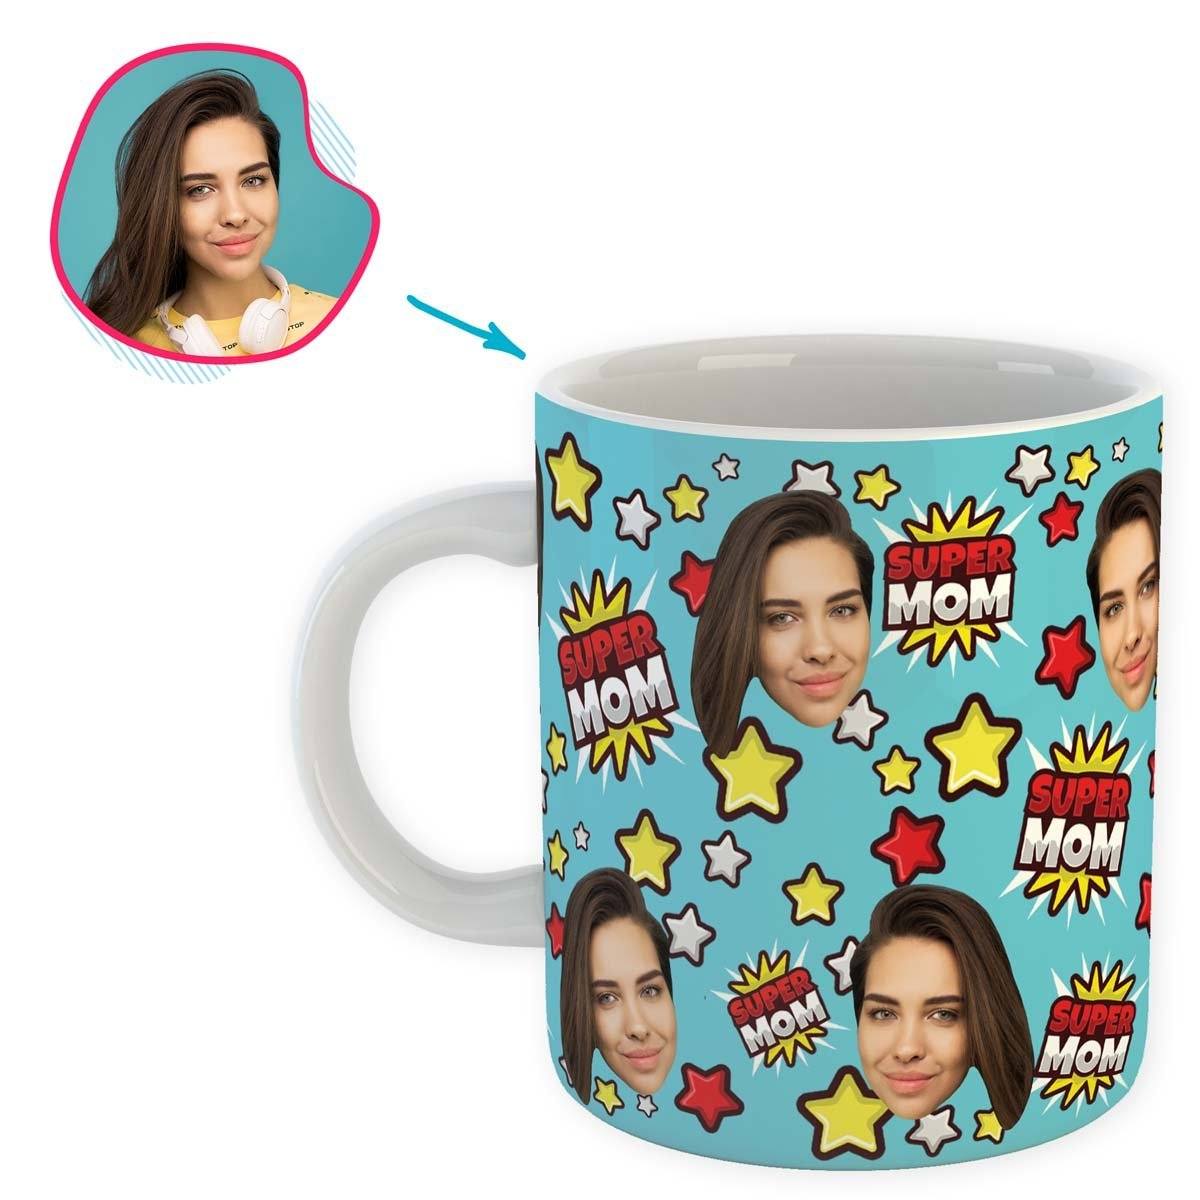 blue Super Mom mug personalized with photo of face printed on it